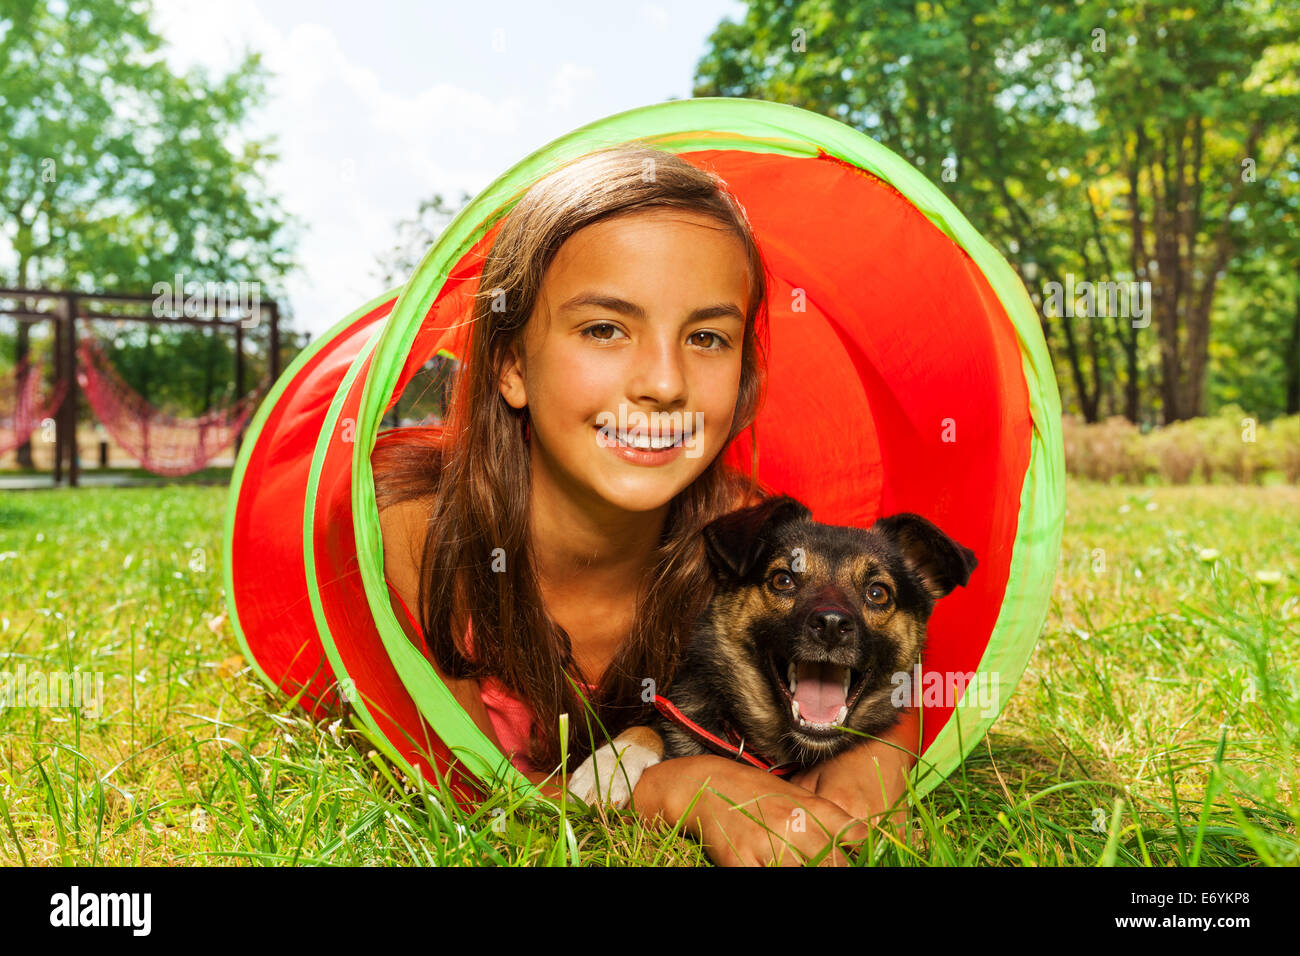 Girl with dog play in playground tube Stock Photo